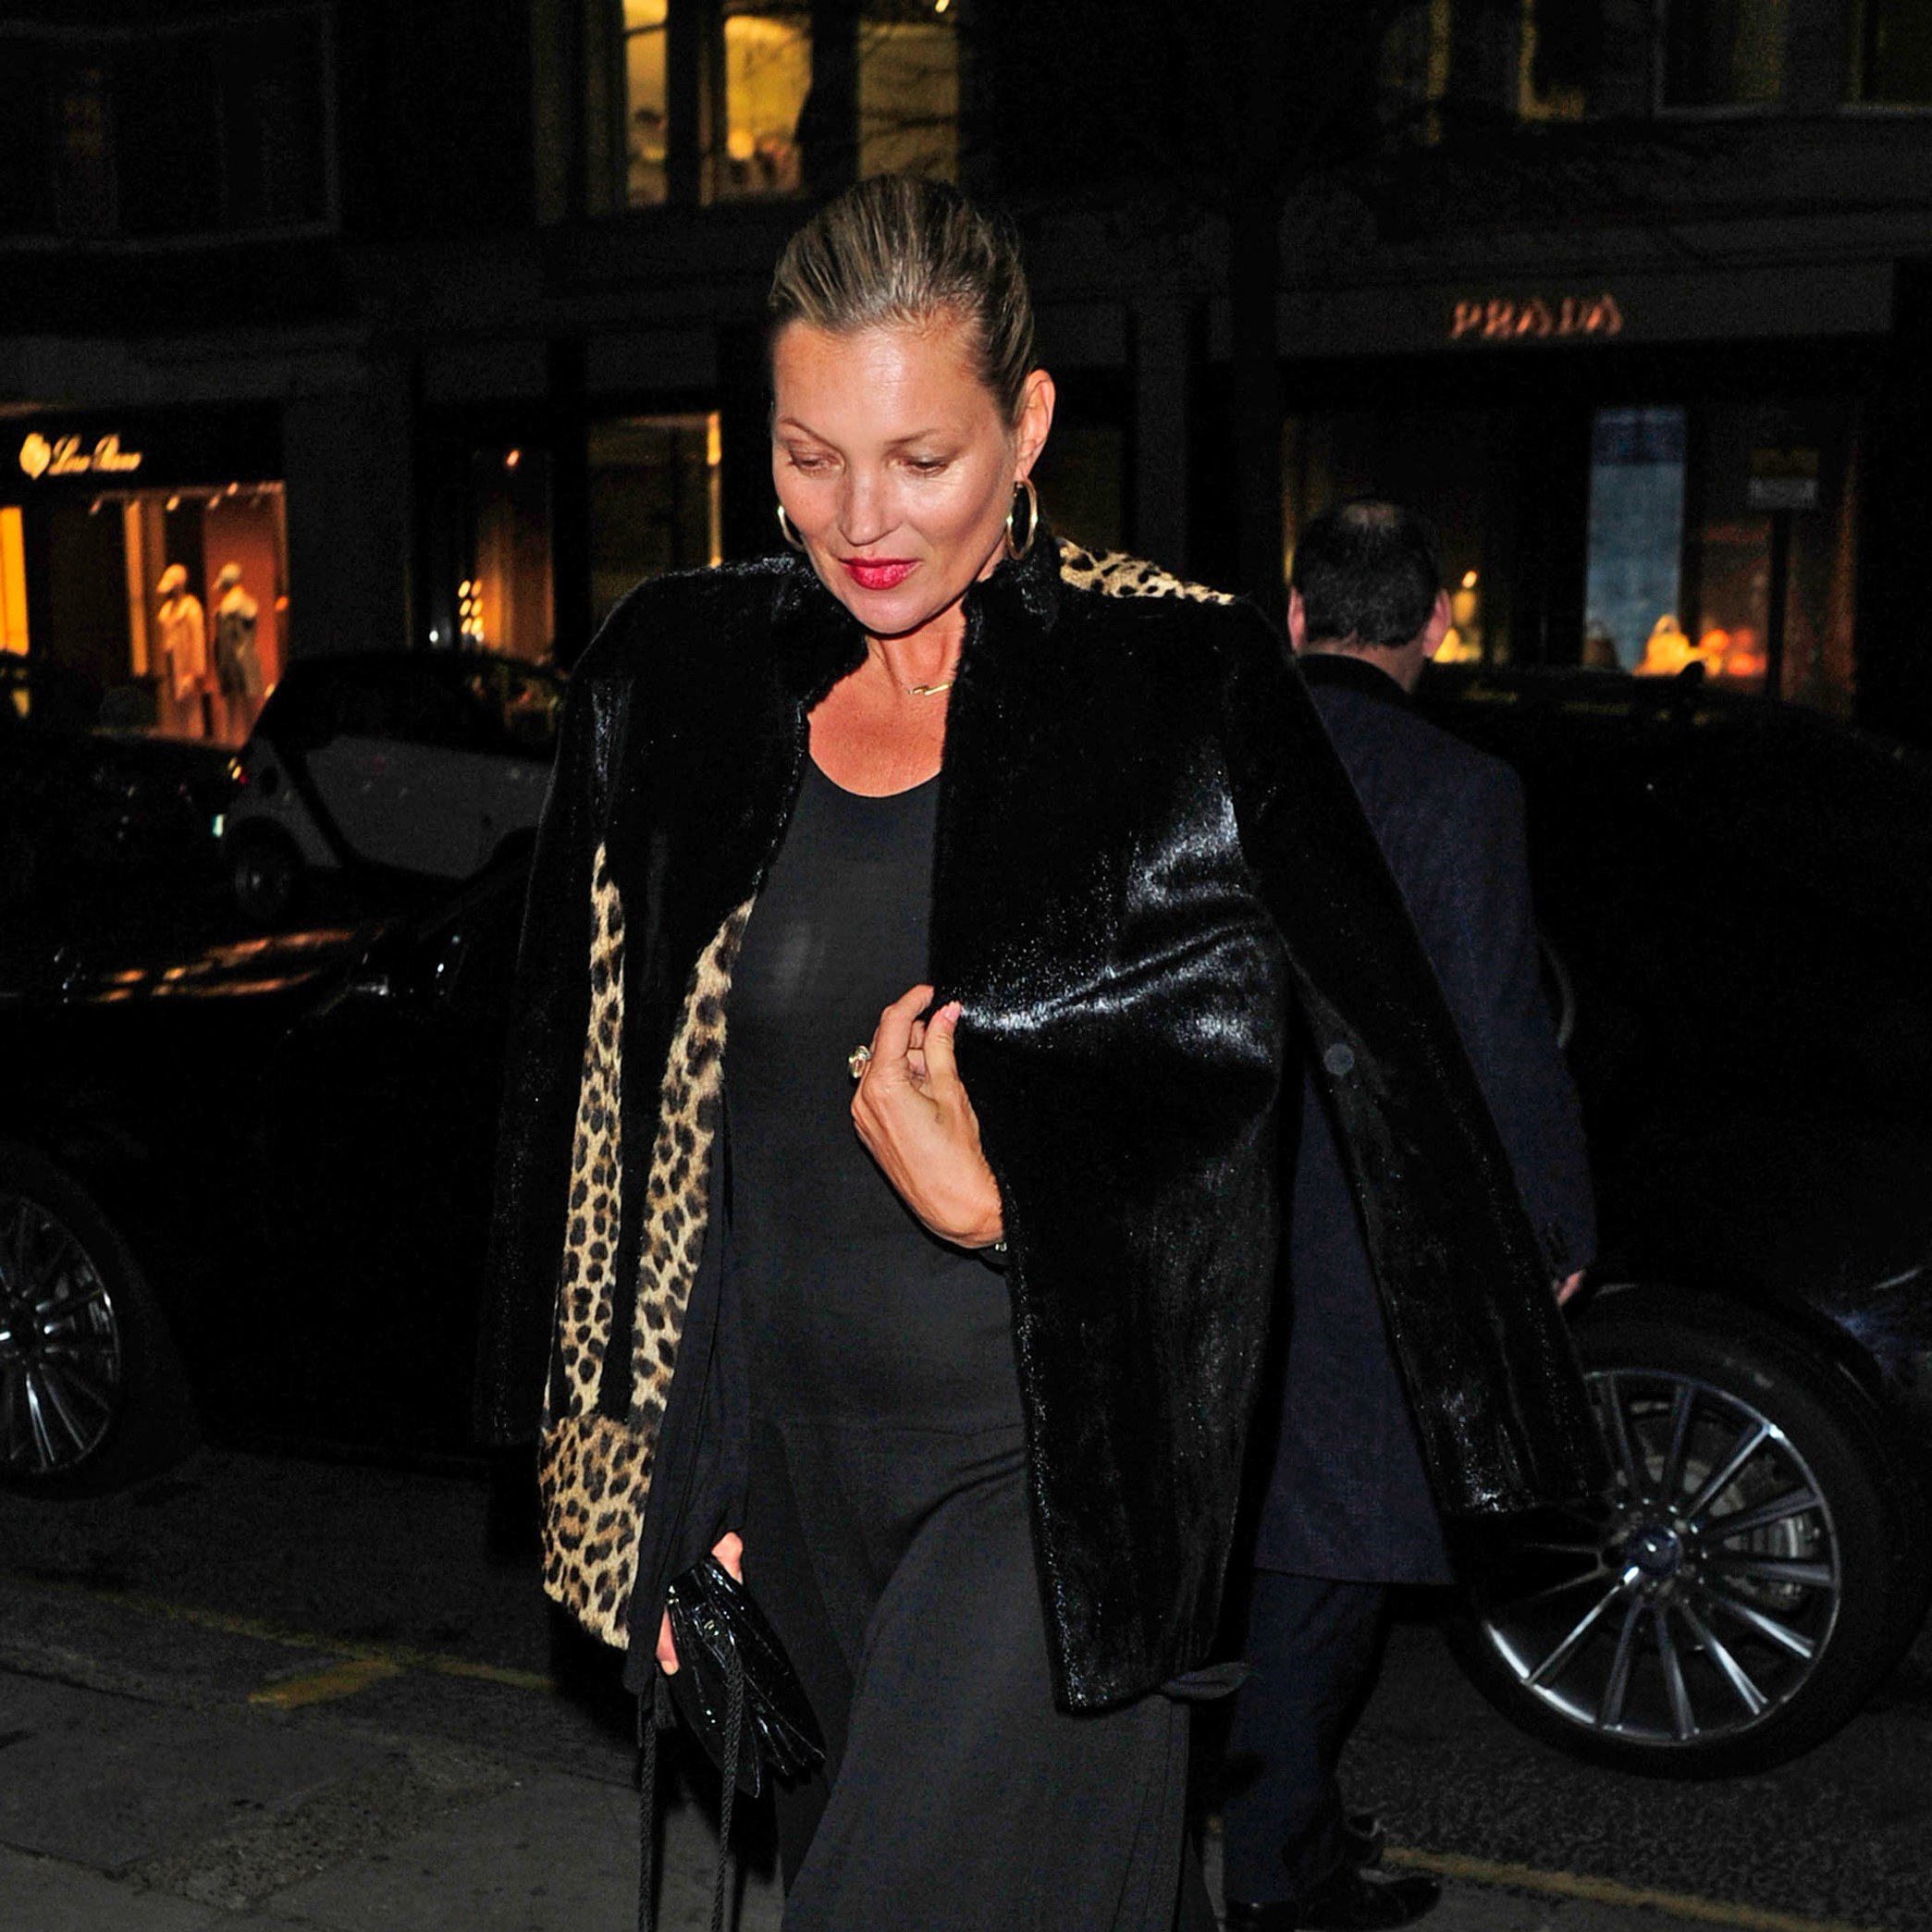 Effortless Style By Kate Moss At Paris Fashion Week | Fashion News ...